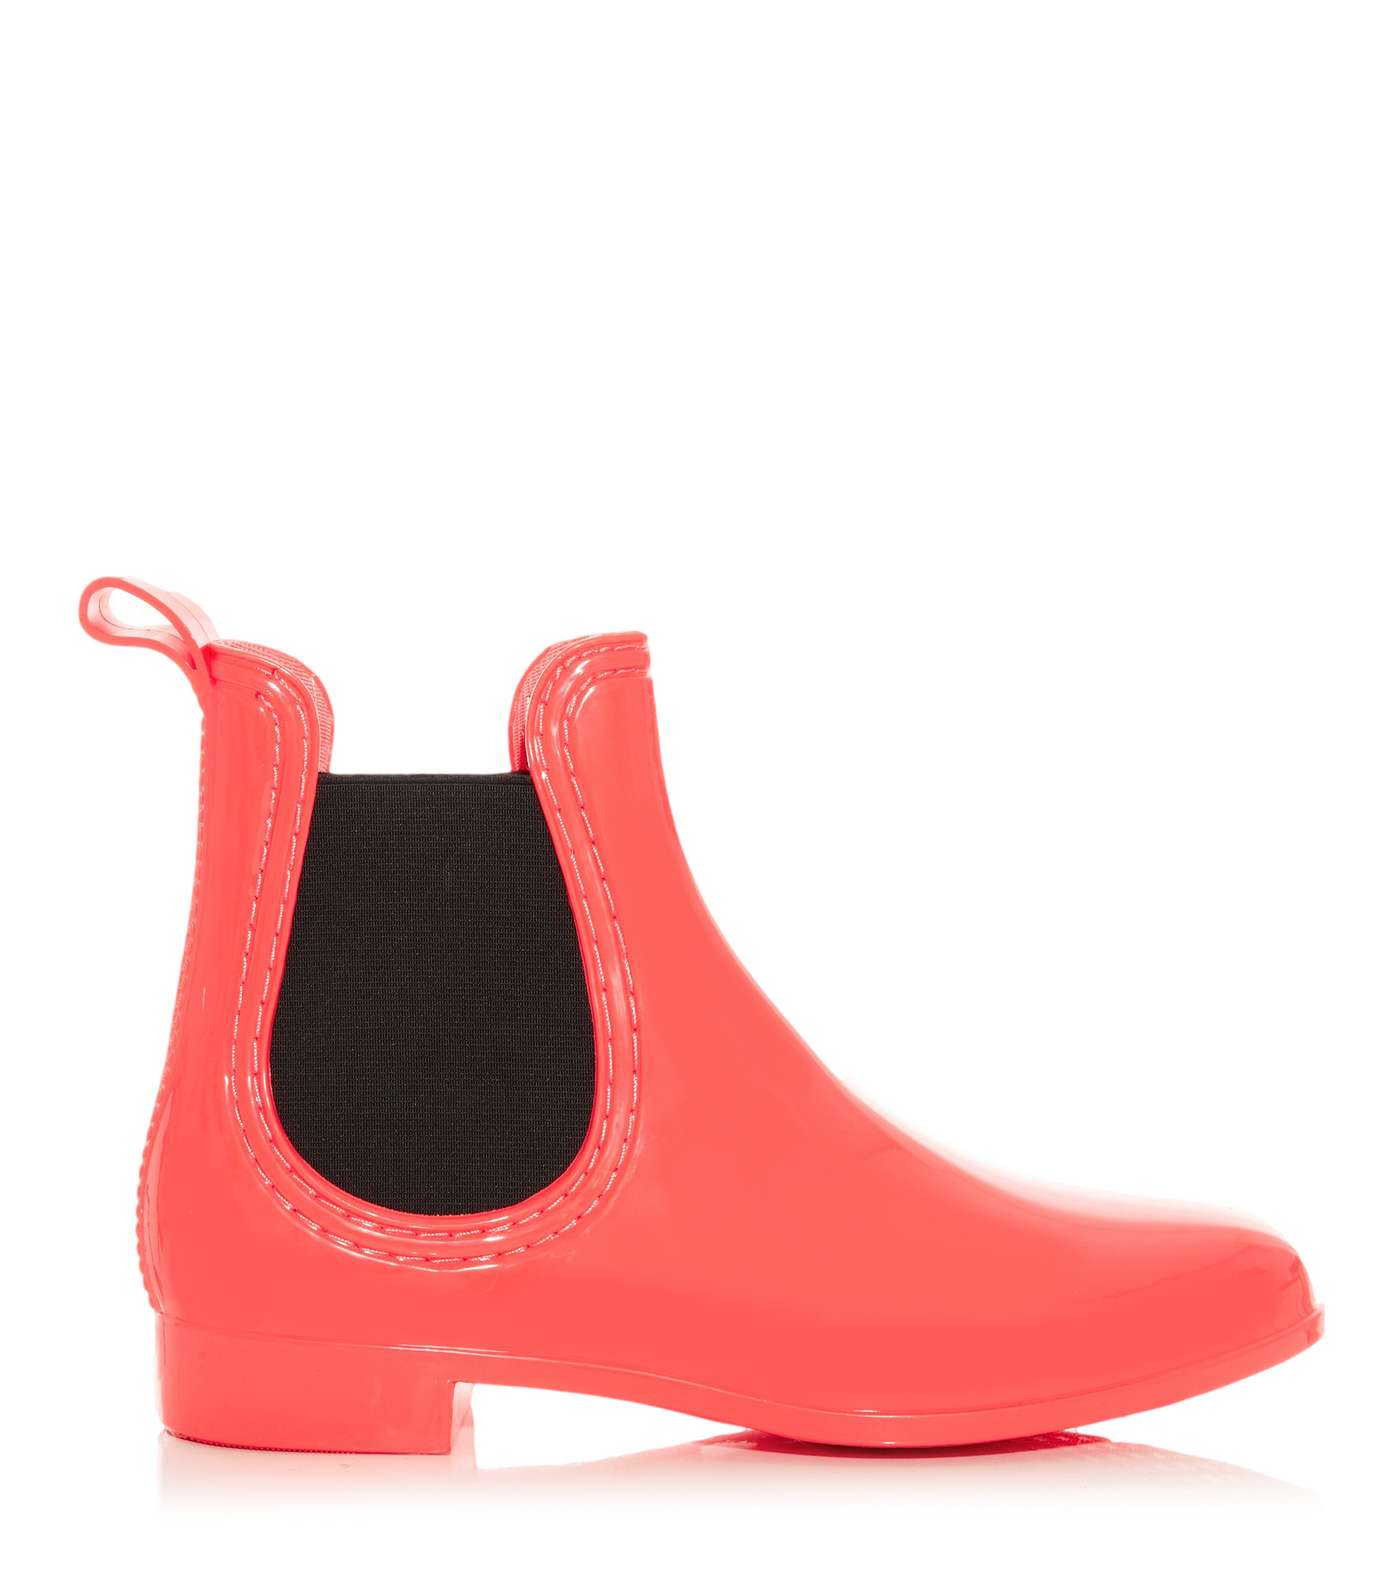 Coral and Black Chelsea Wellies